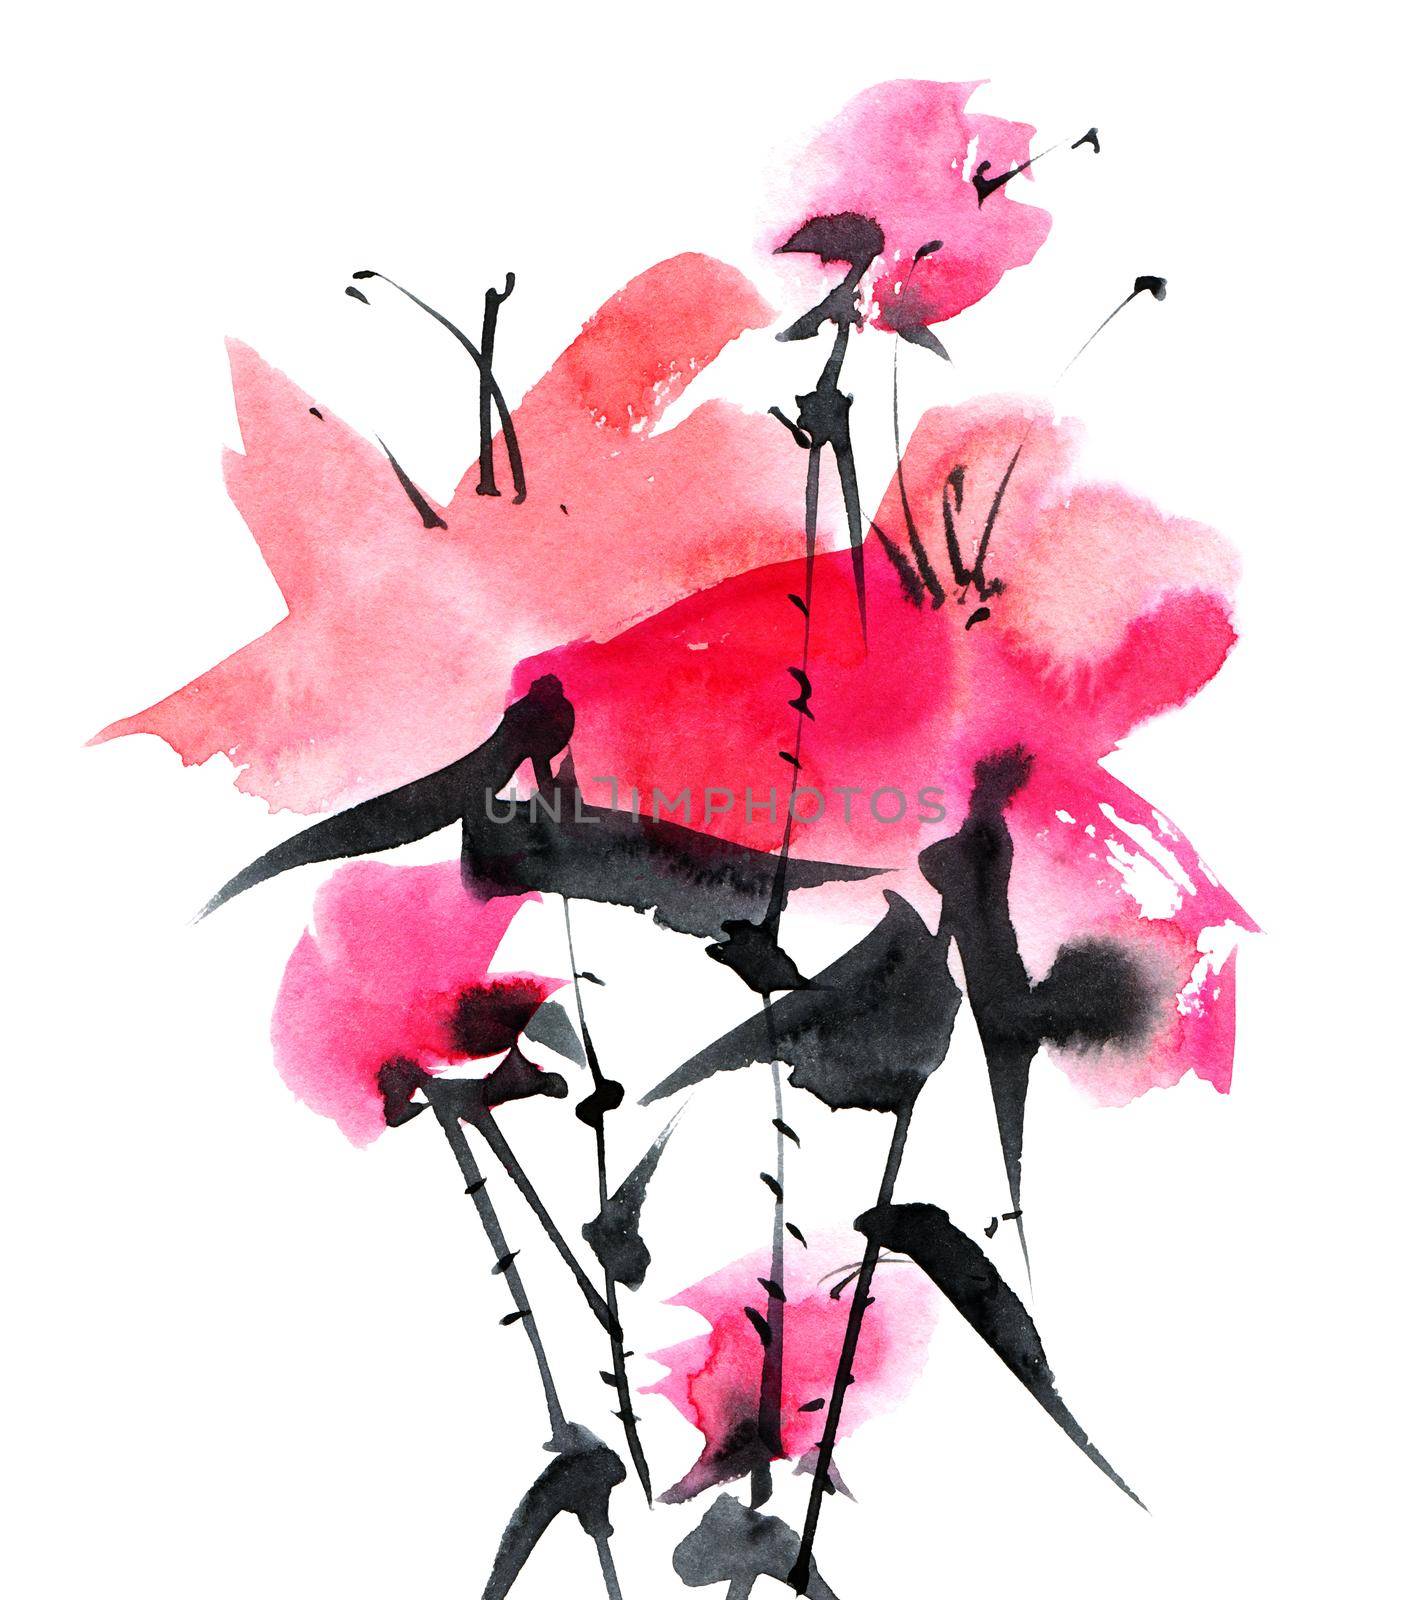 Watercolor and ink illustration of pink flowers bouquet on white background. Oriental traditional painting in style sumi-e, u-sin and gohua. Design element for greeting card, invitation or cover.